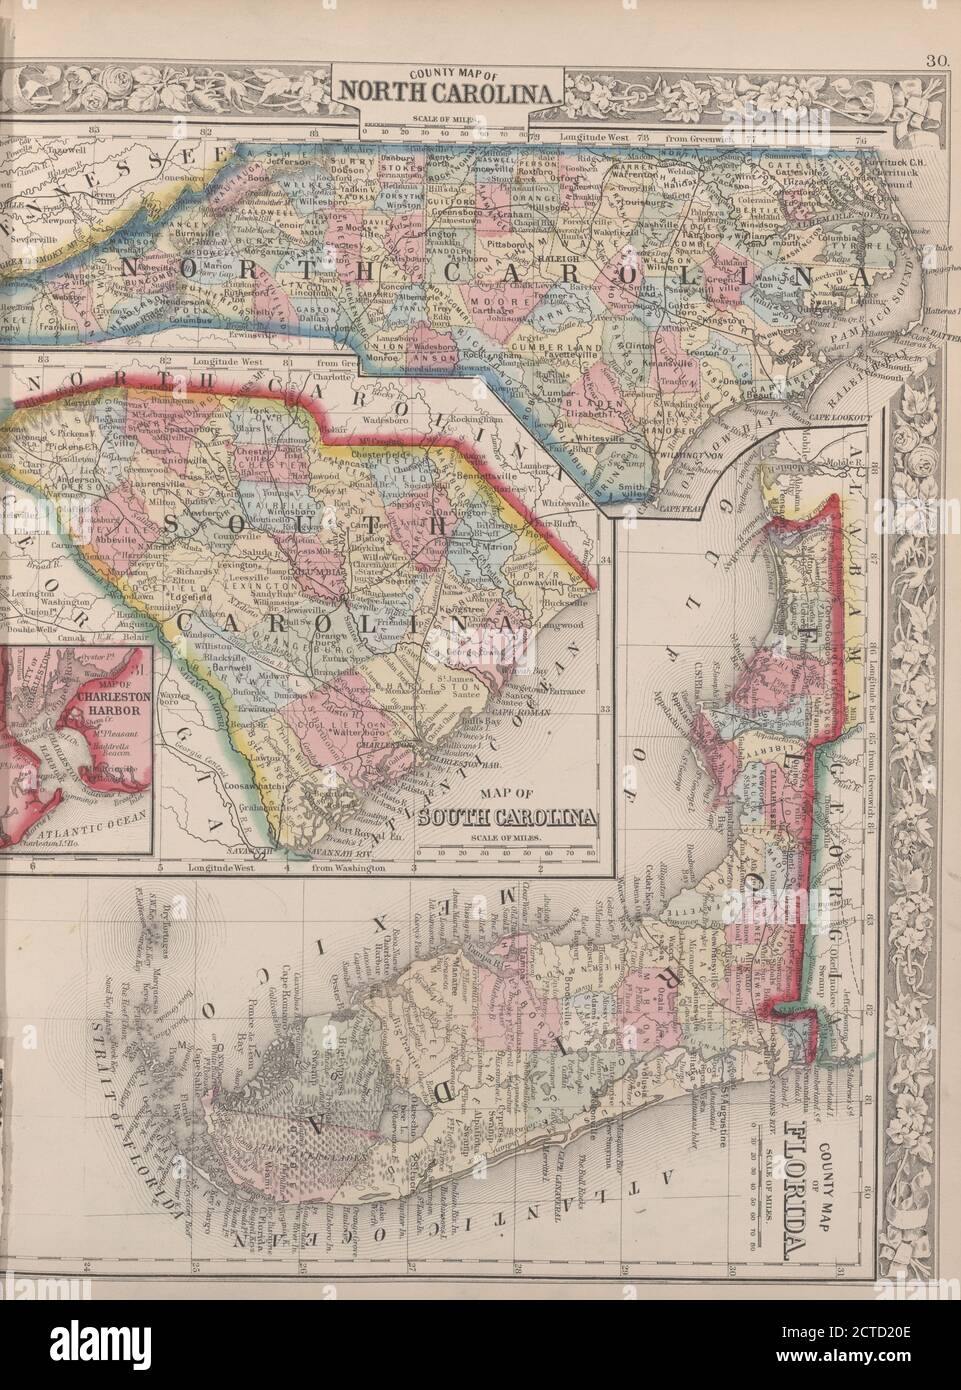 County map of North Carolina, Map of South Carolina, County map of Florida ; Map of Charleston Harbour inset., still image, Maps, 1863, Mitchell, S. Augustus (Samuel Augustus) (1792-1868 Stockfoto